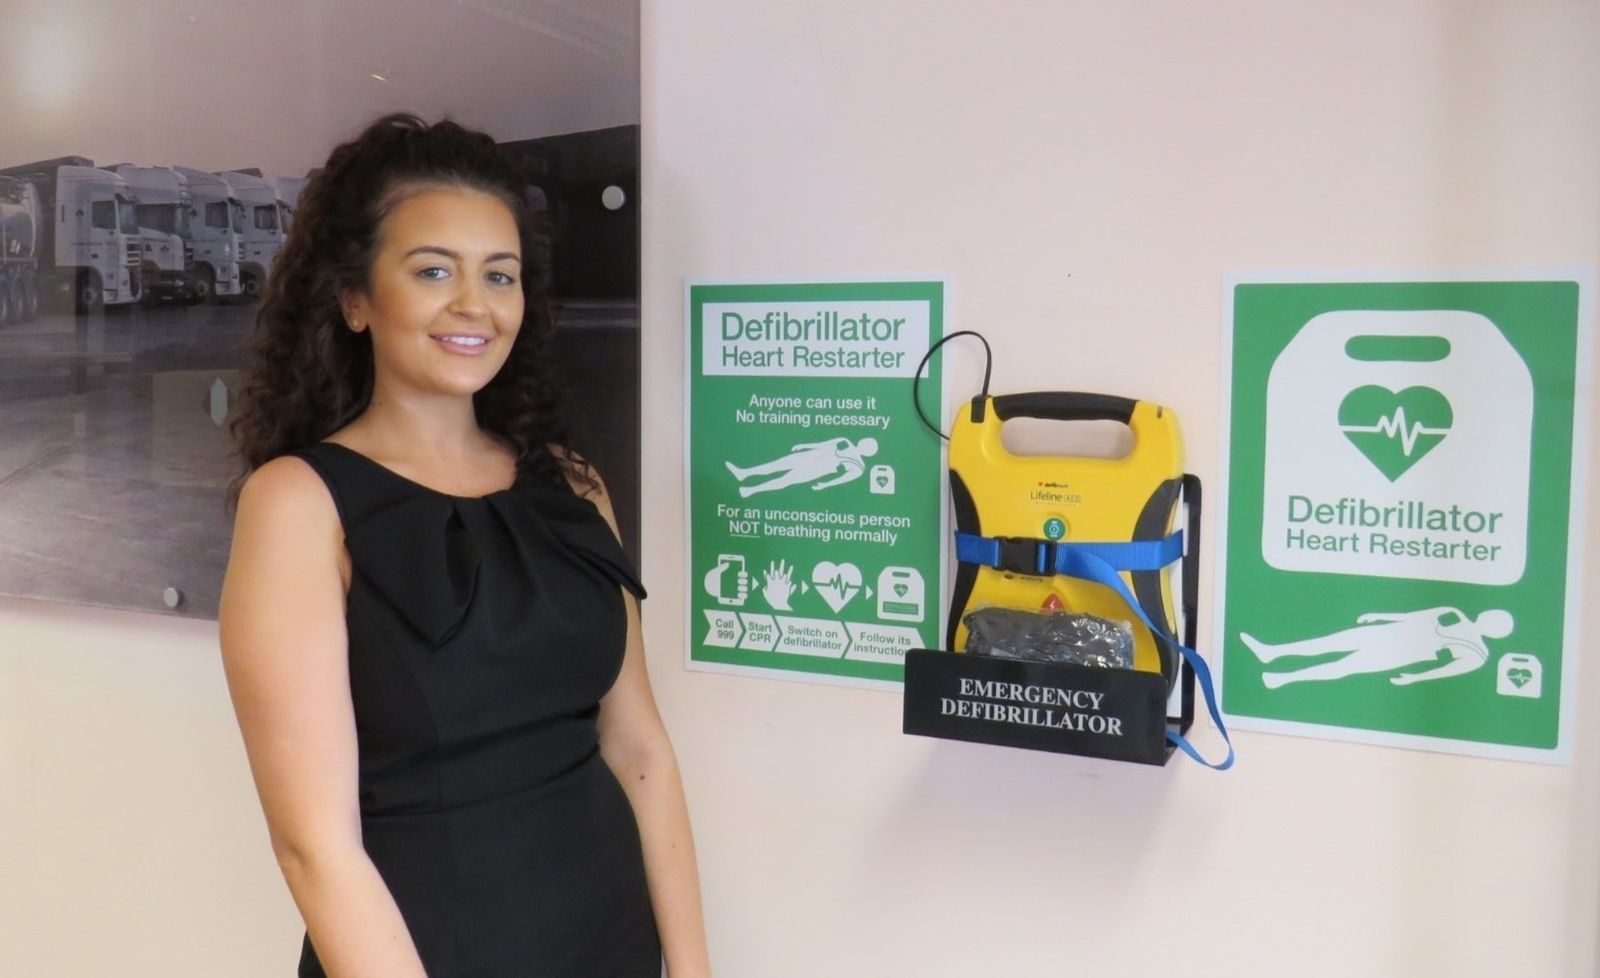 Good-hearted chemical company extends defib rollout